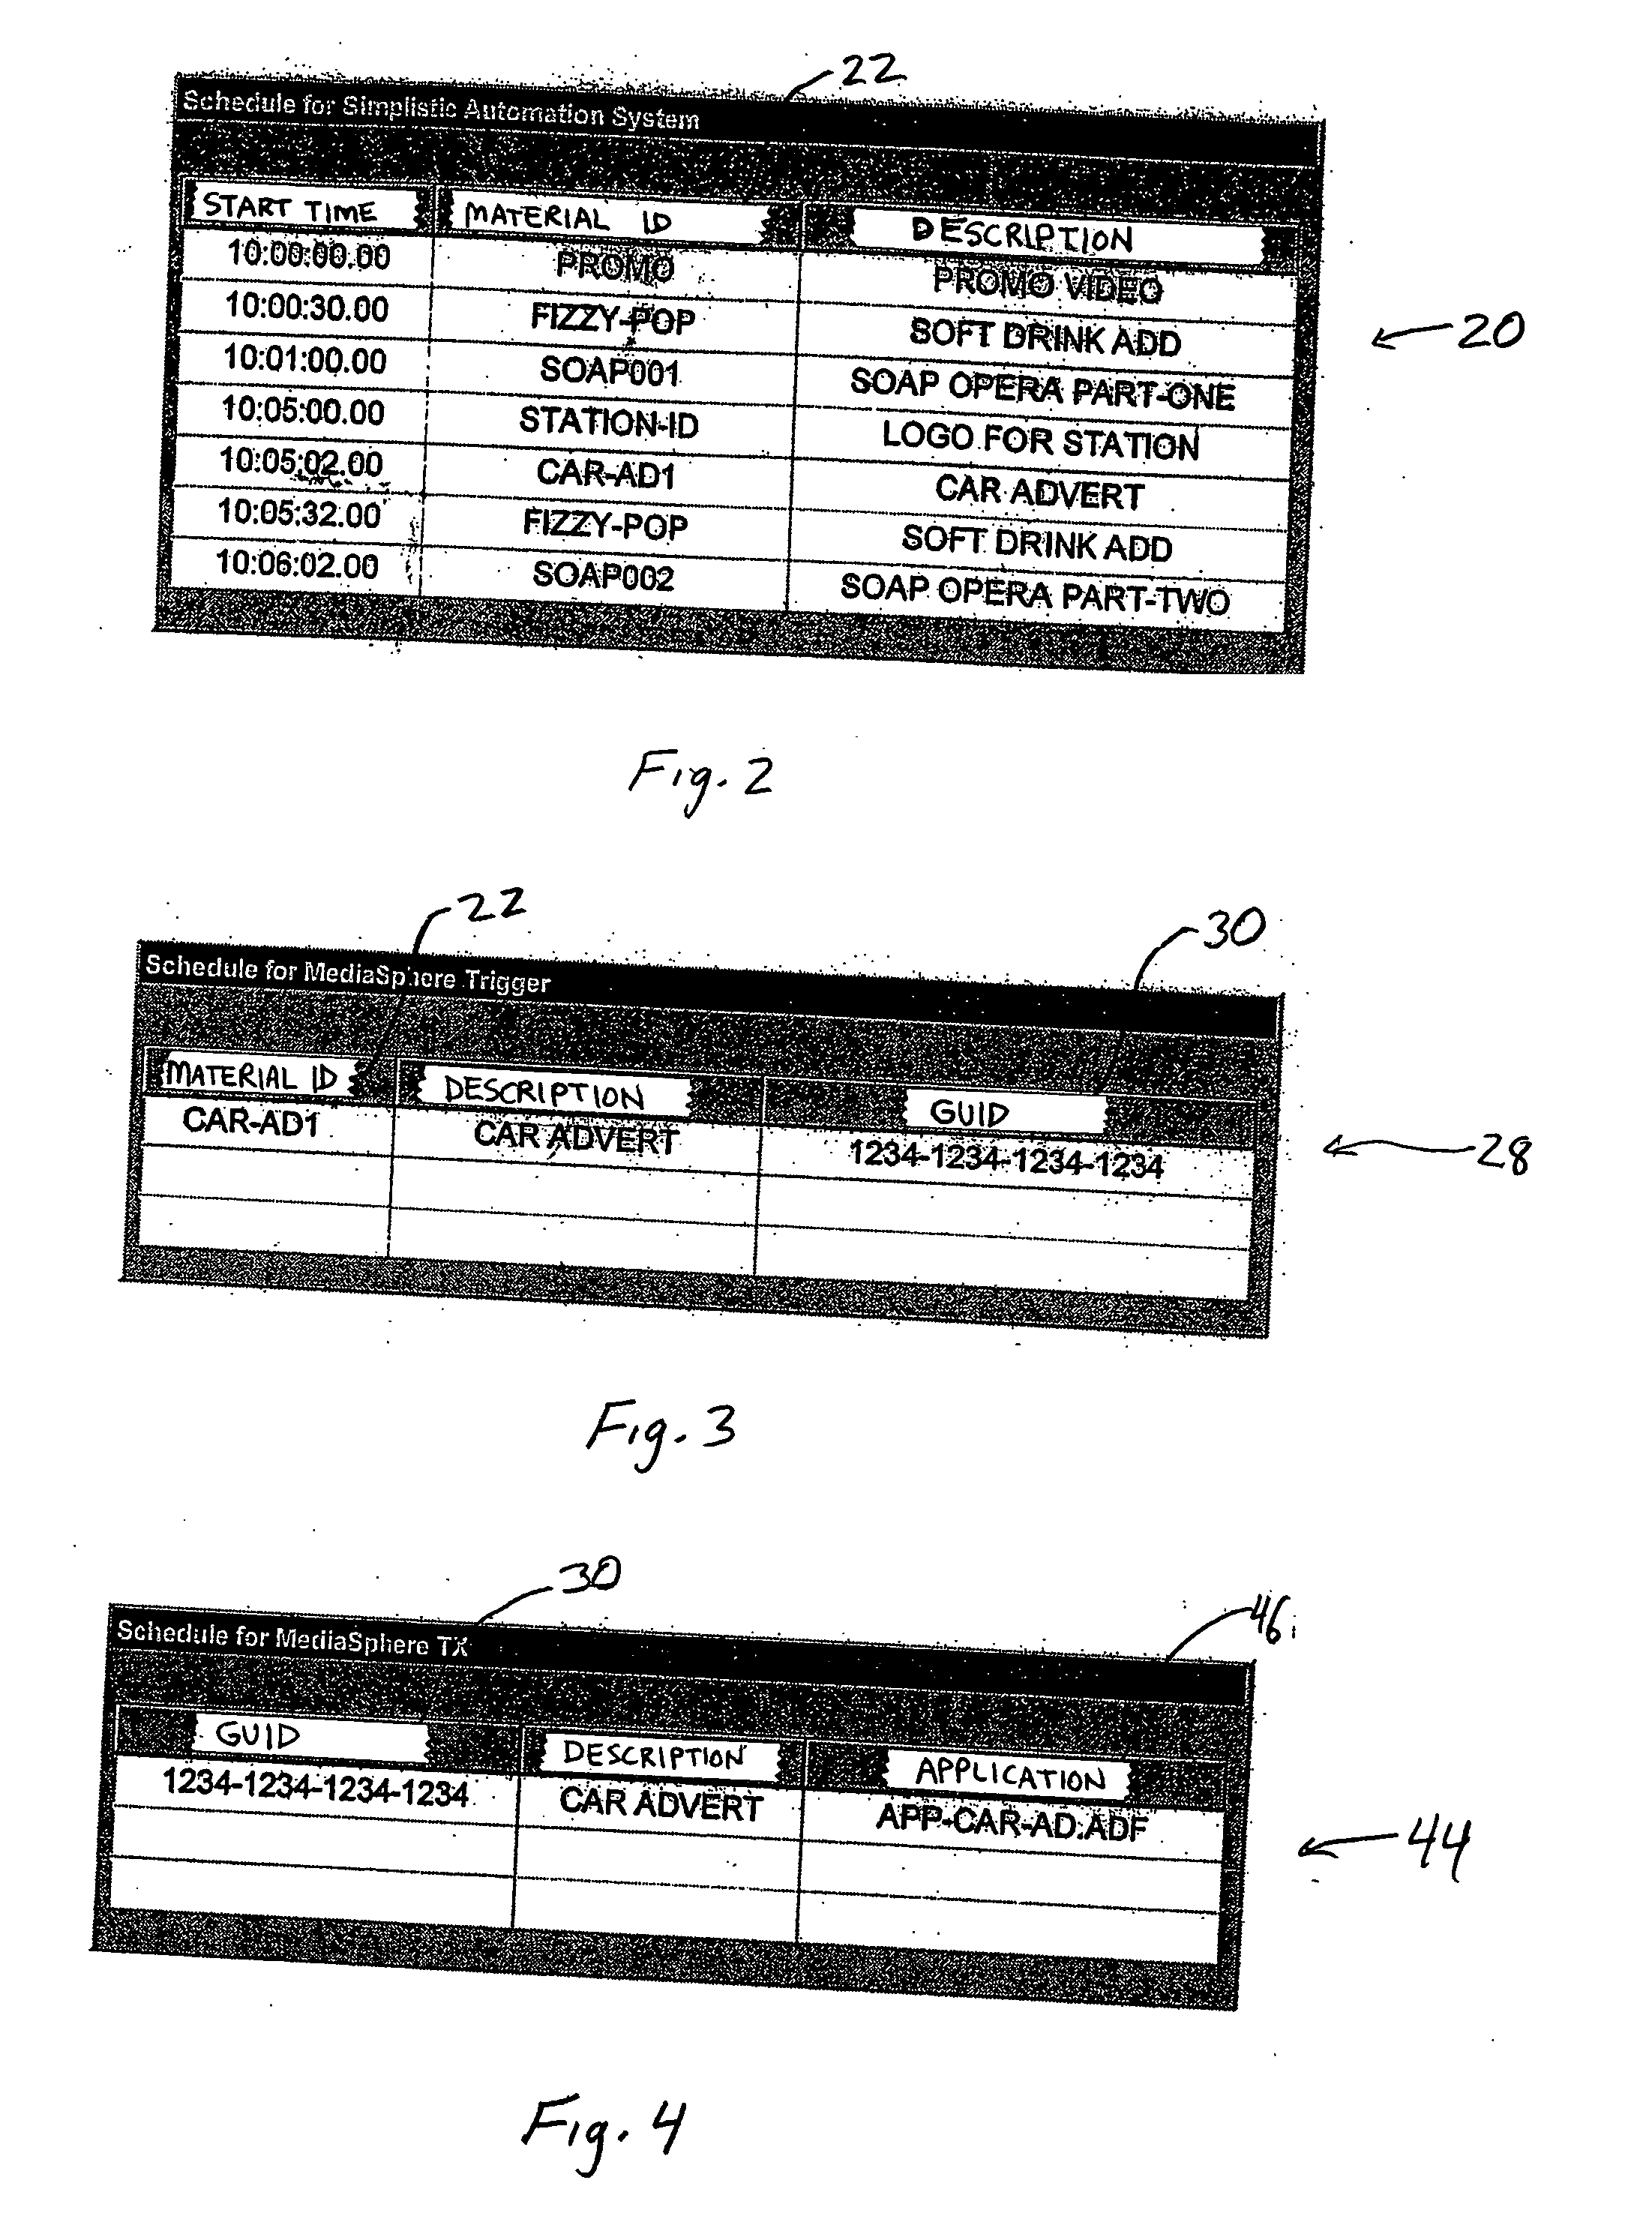 System and method for providing trigger information in a video signal and playing out a triggered event